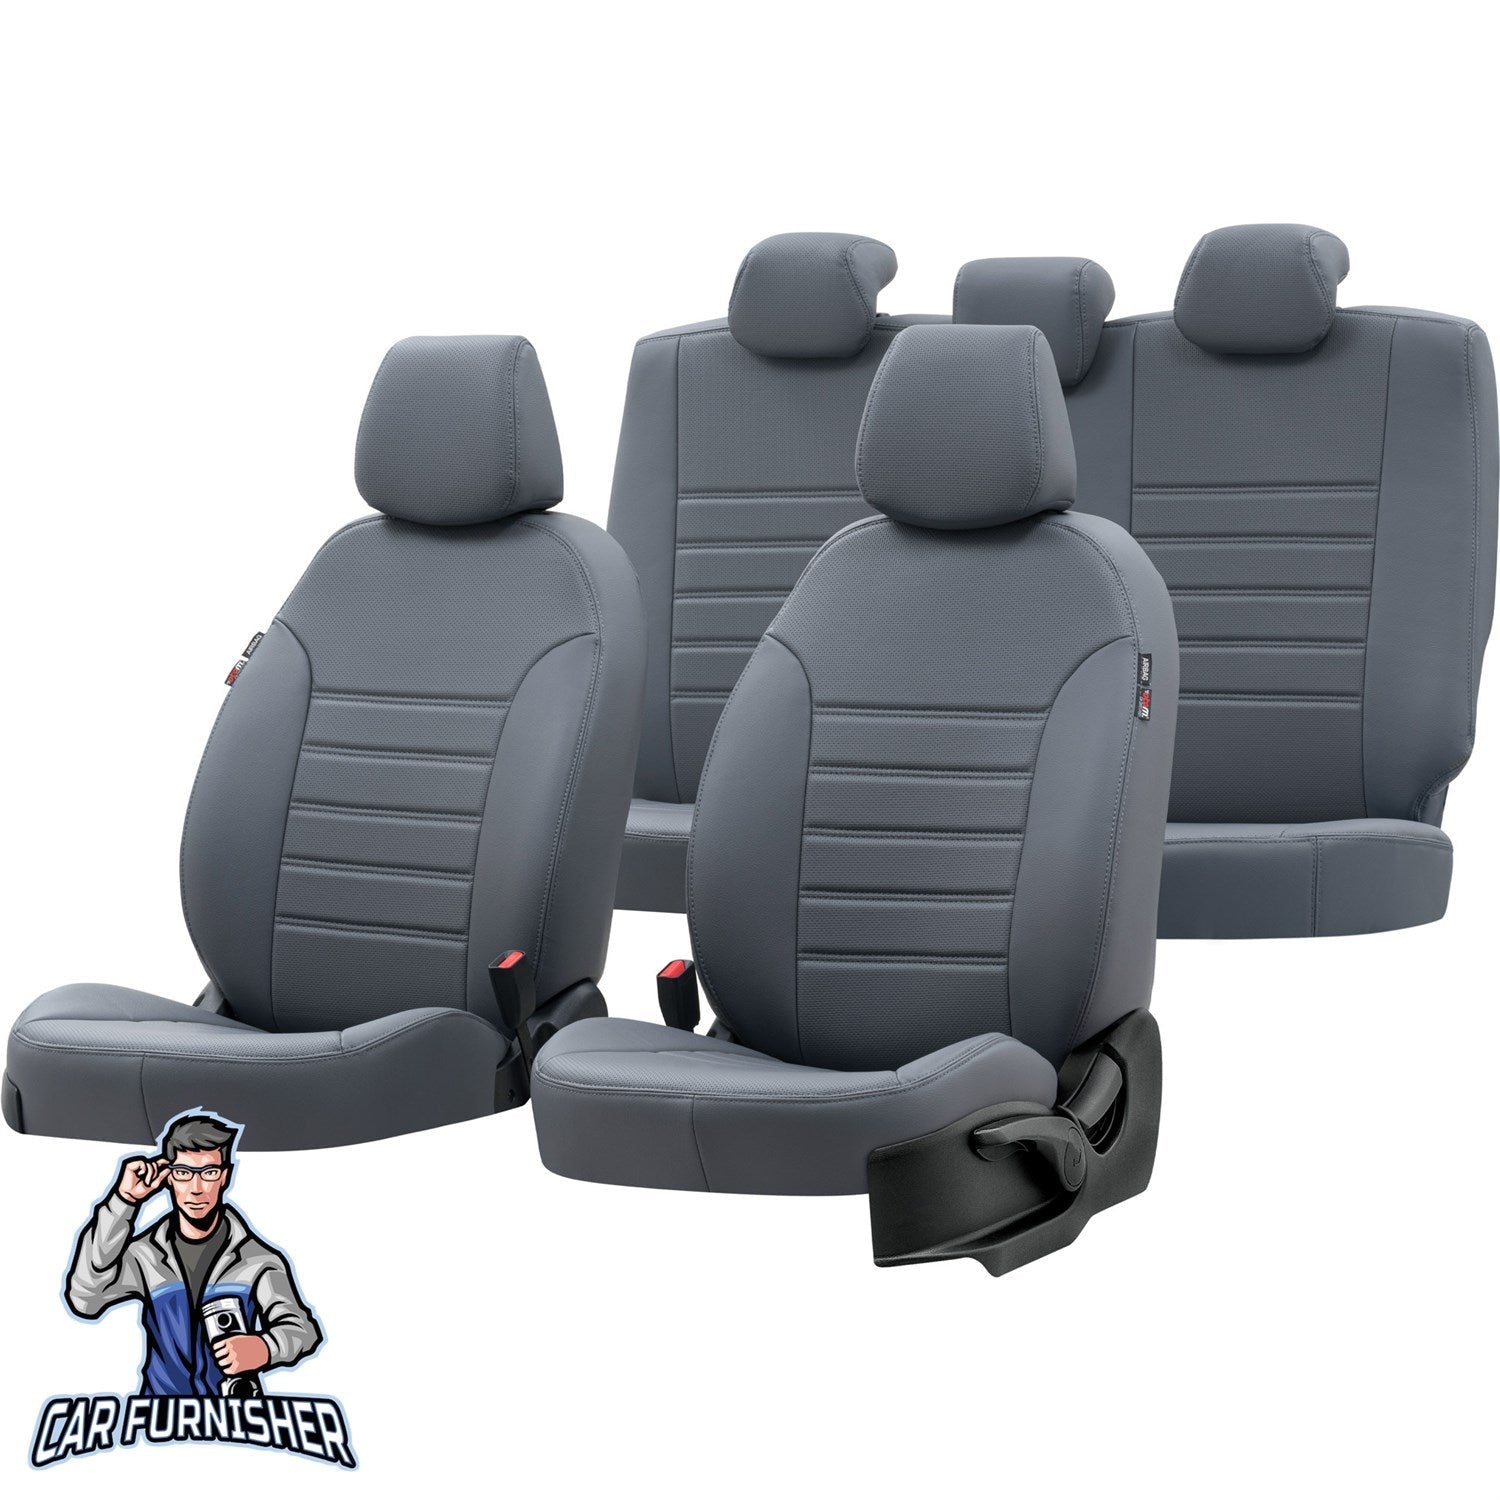 Ford Kuga Seat Covers New York Leather Design Smoked Leather